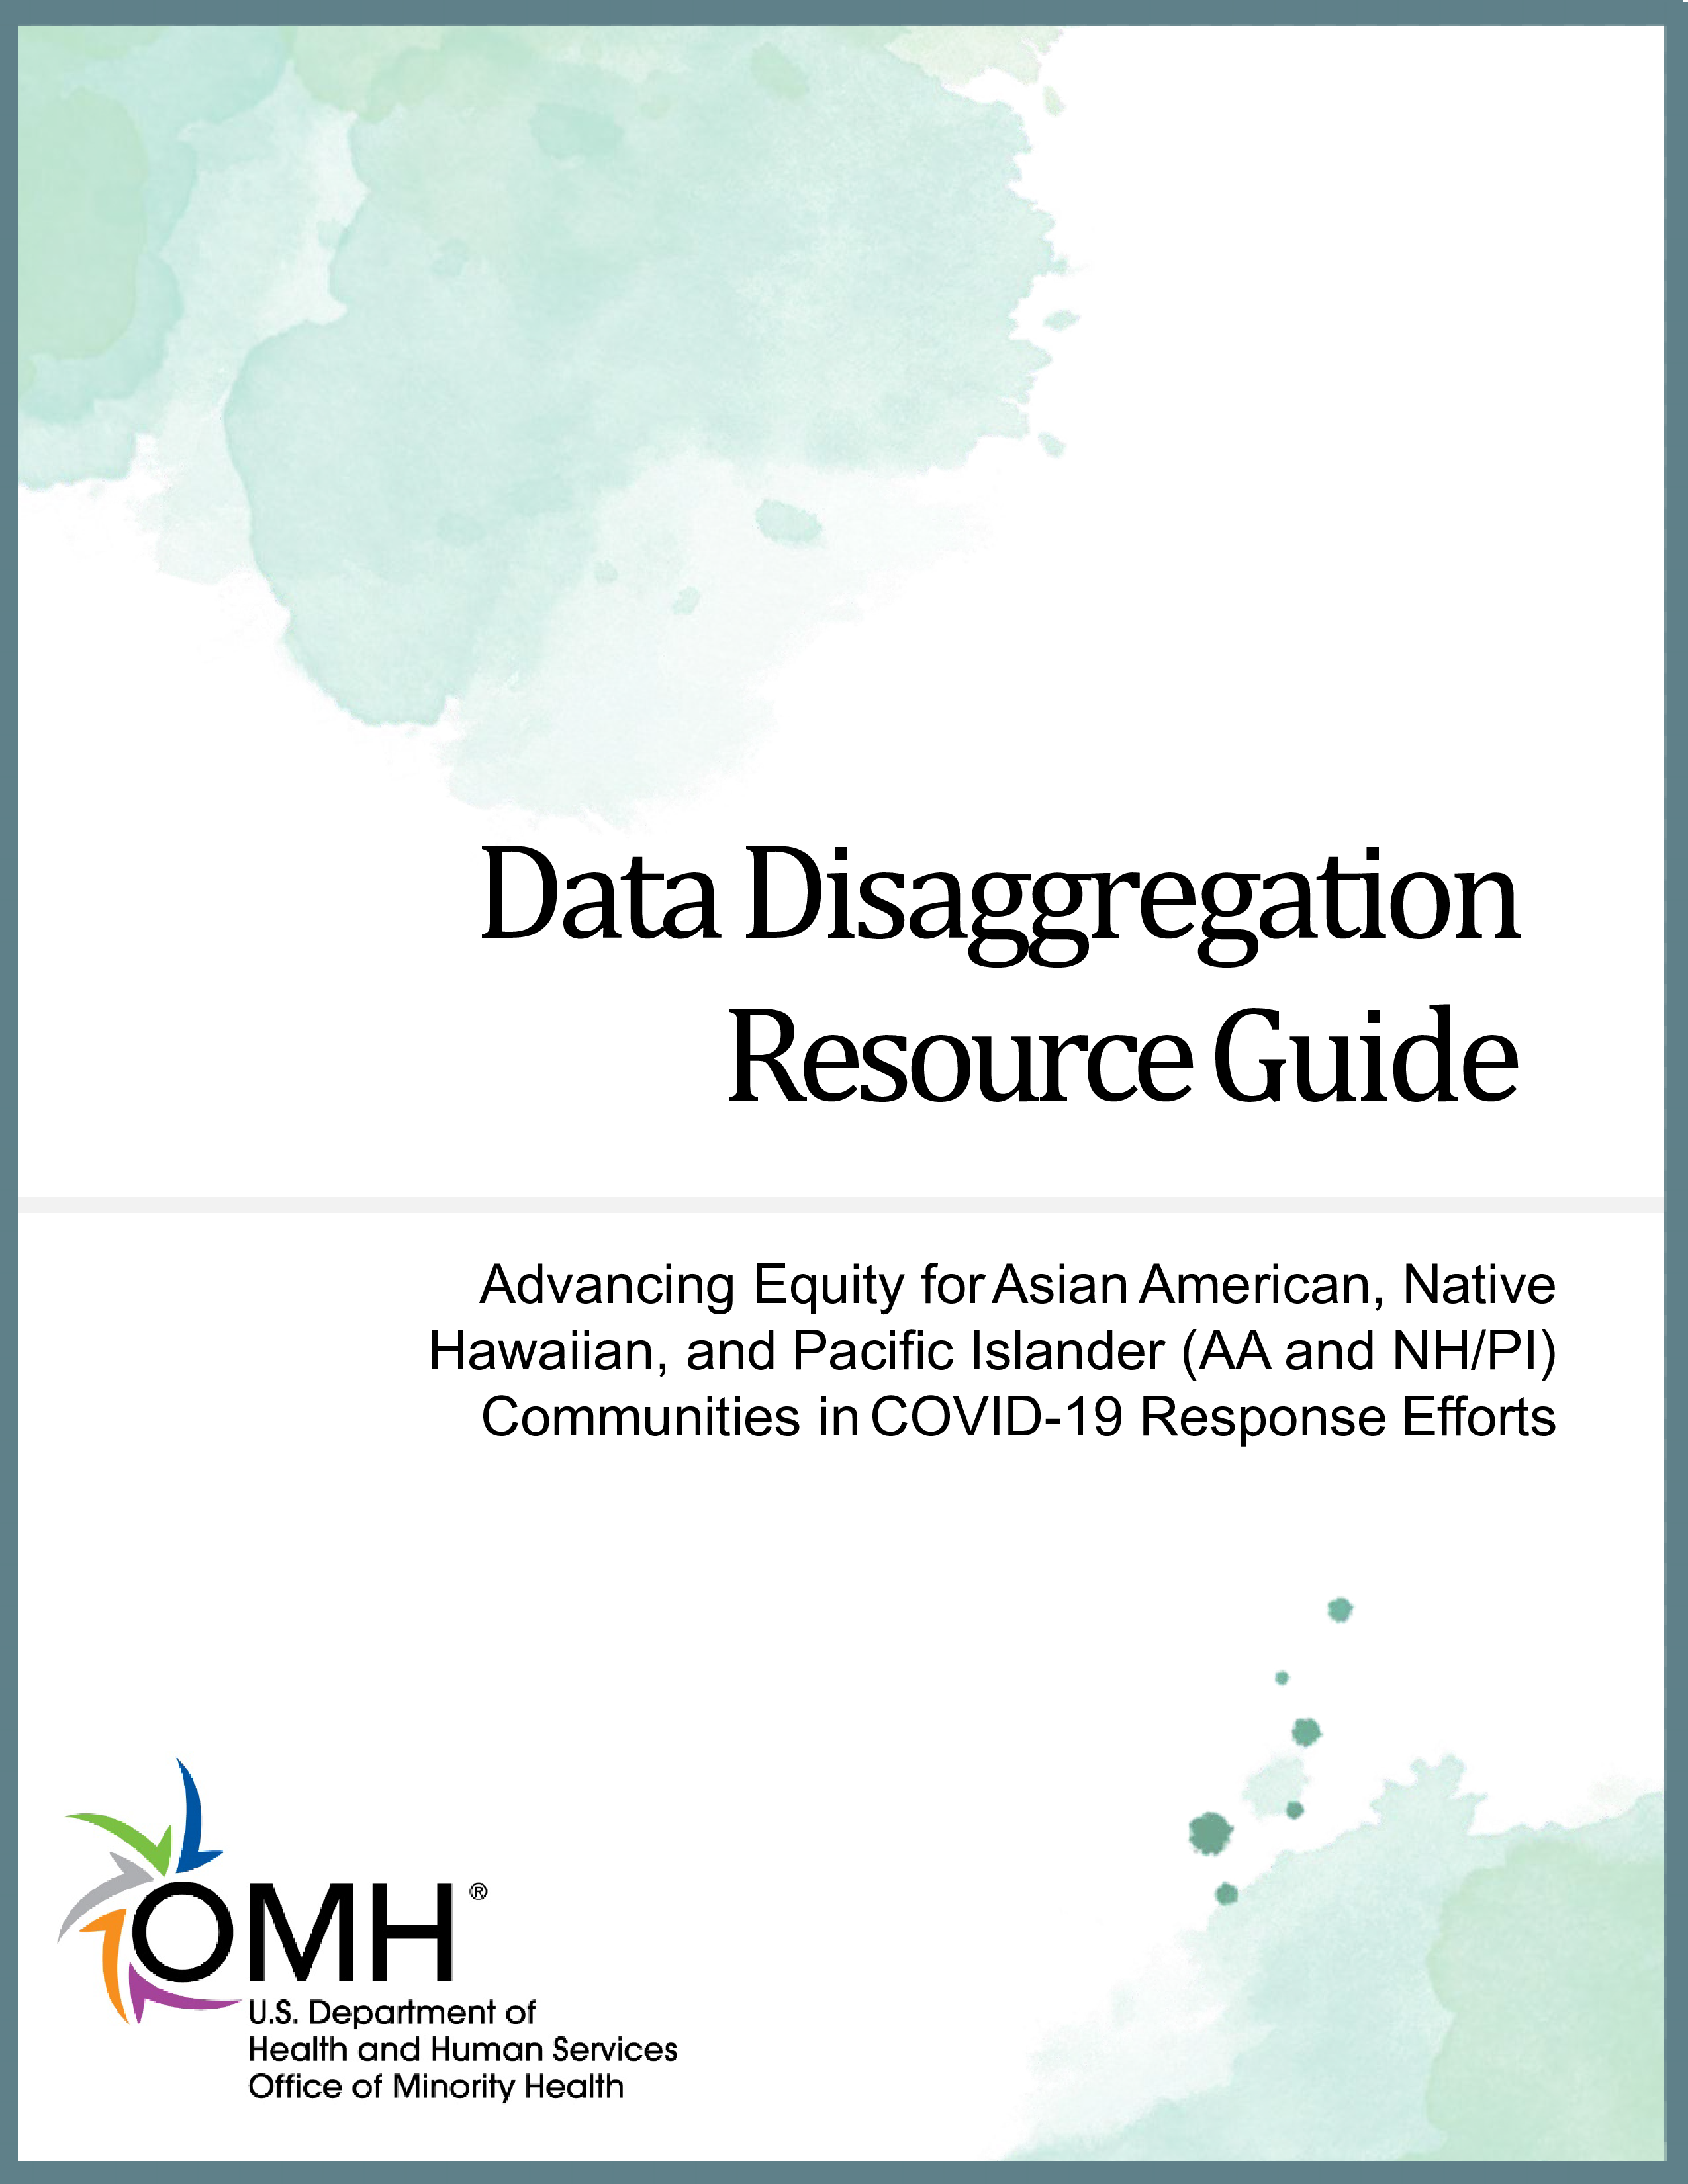 The title page of a report detailing ways to advance equity for Asian American, Native Hawaiian, and Pacific Islander (AA and NH/PI) communities in COVID-19 response efforts.